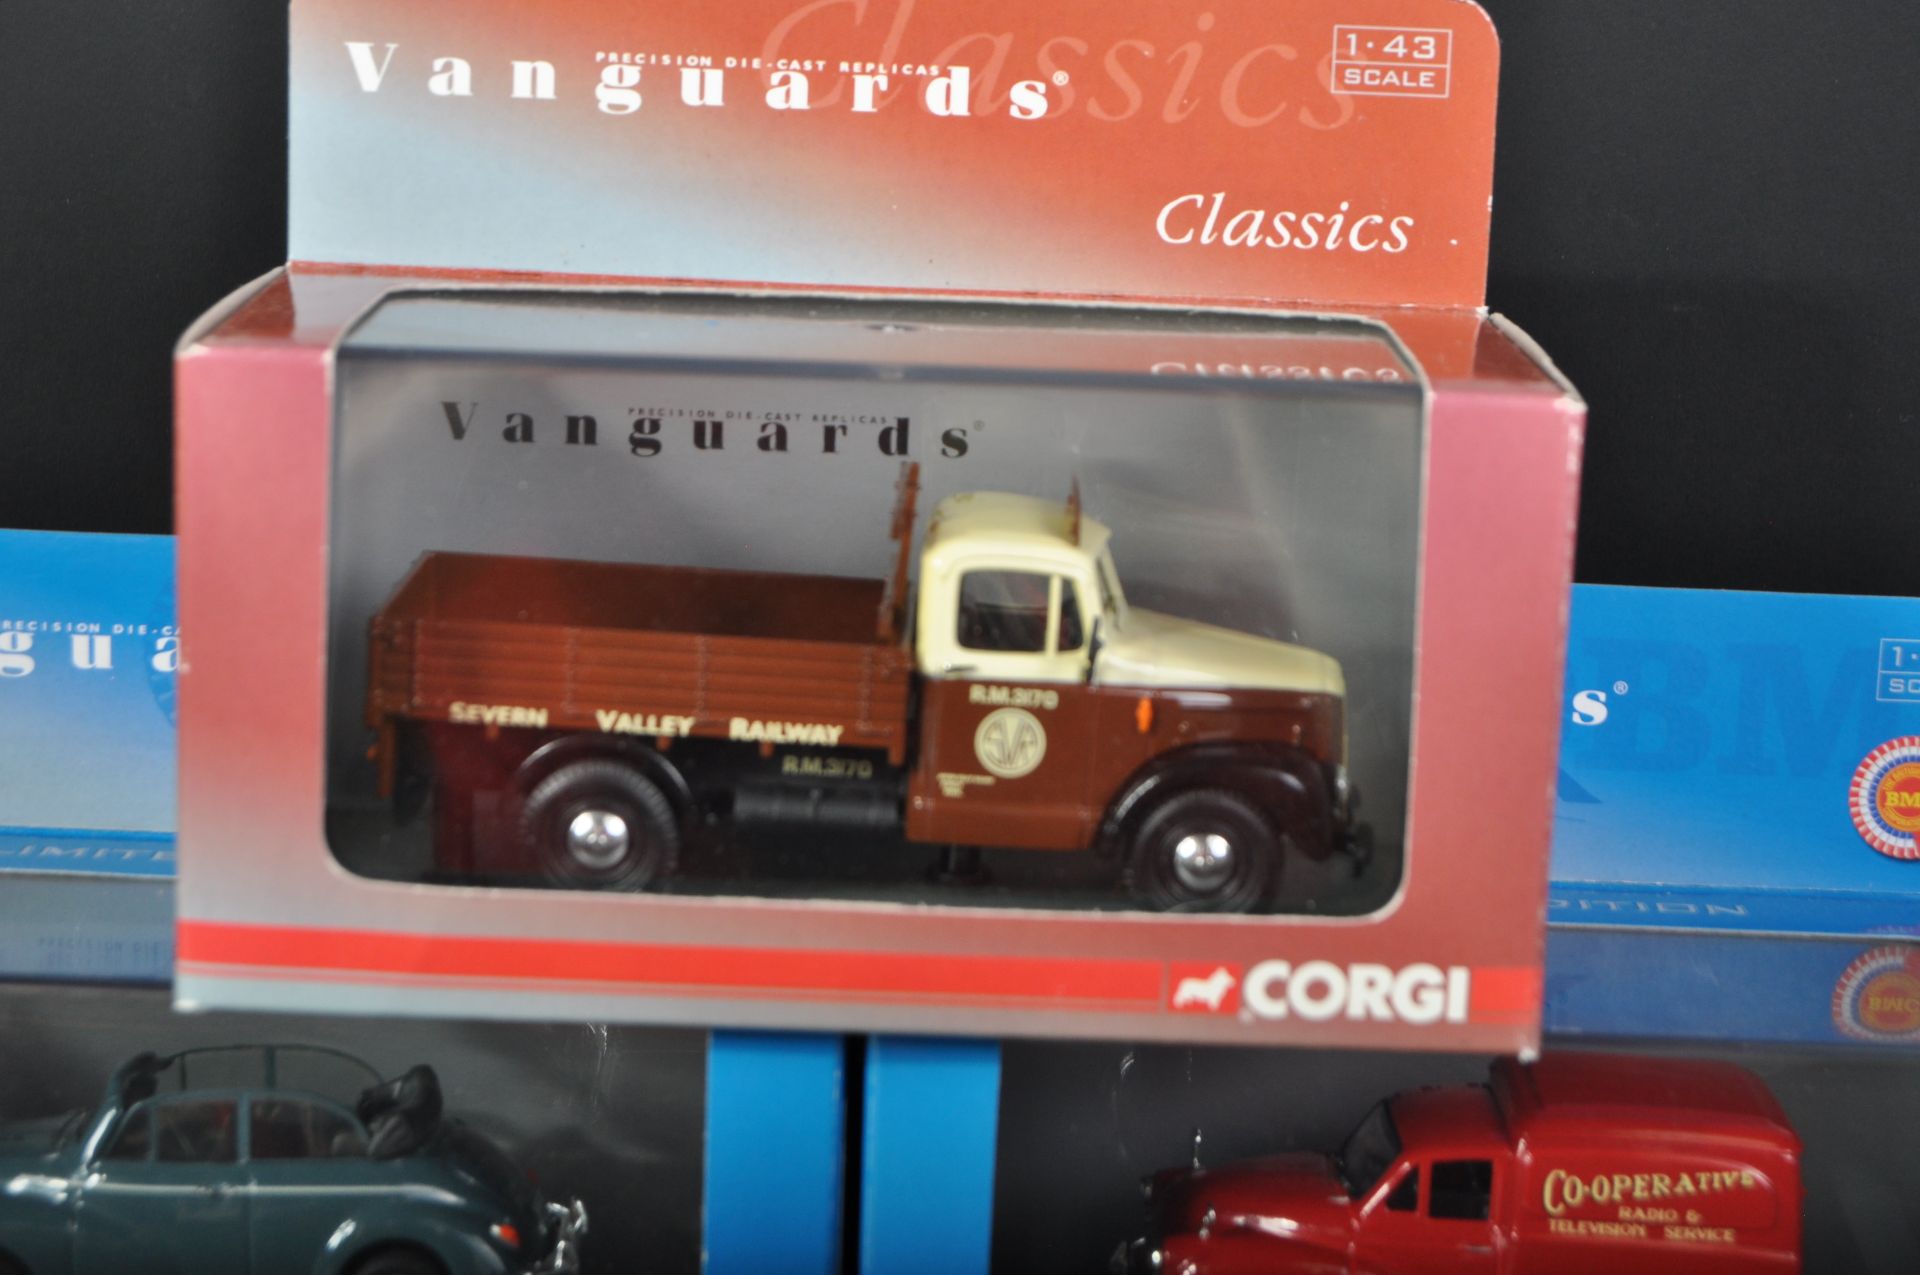 COLLECTION OF CORGI VANGUARDS 1/43 SCALE DIECAST MODEL CARS - Image 2 of 4